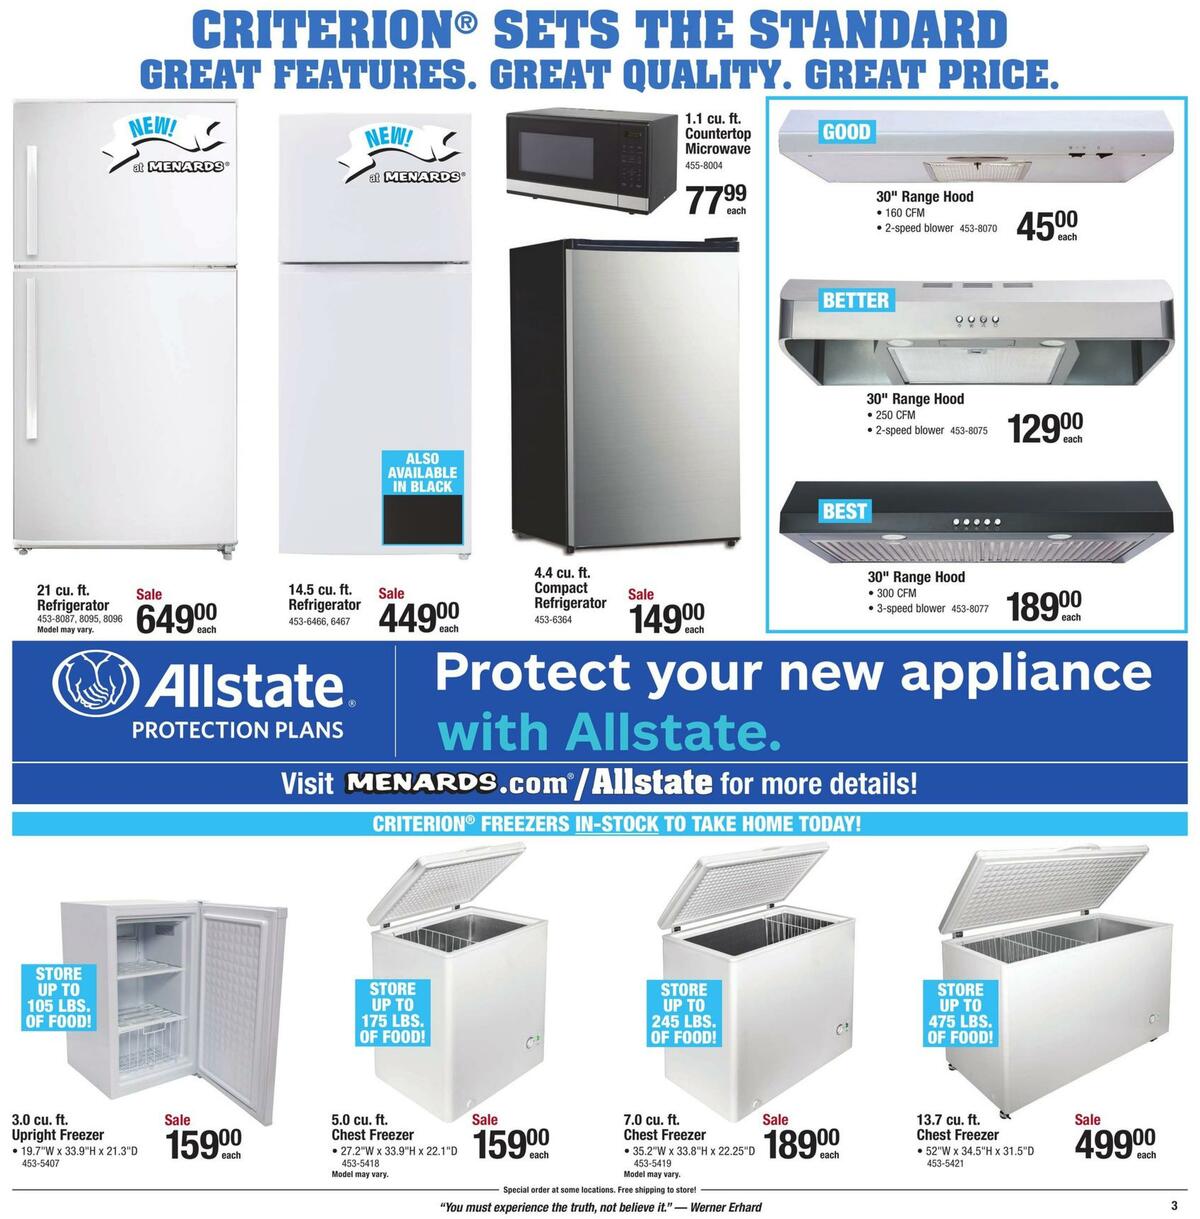 Menards Weekly Ad from January 3